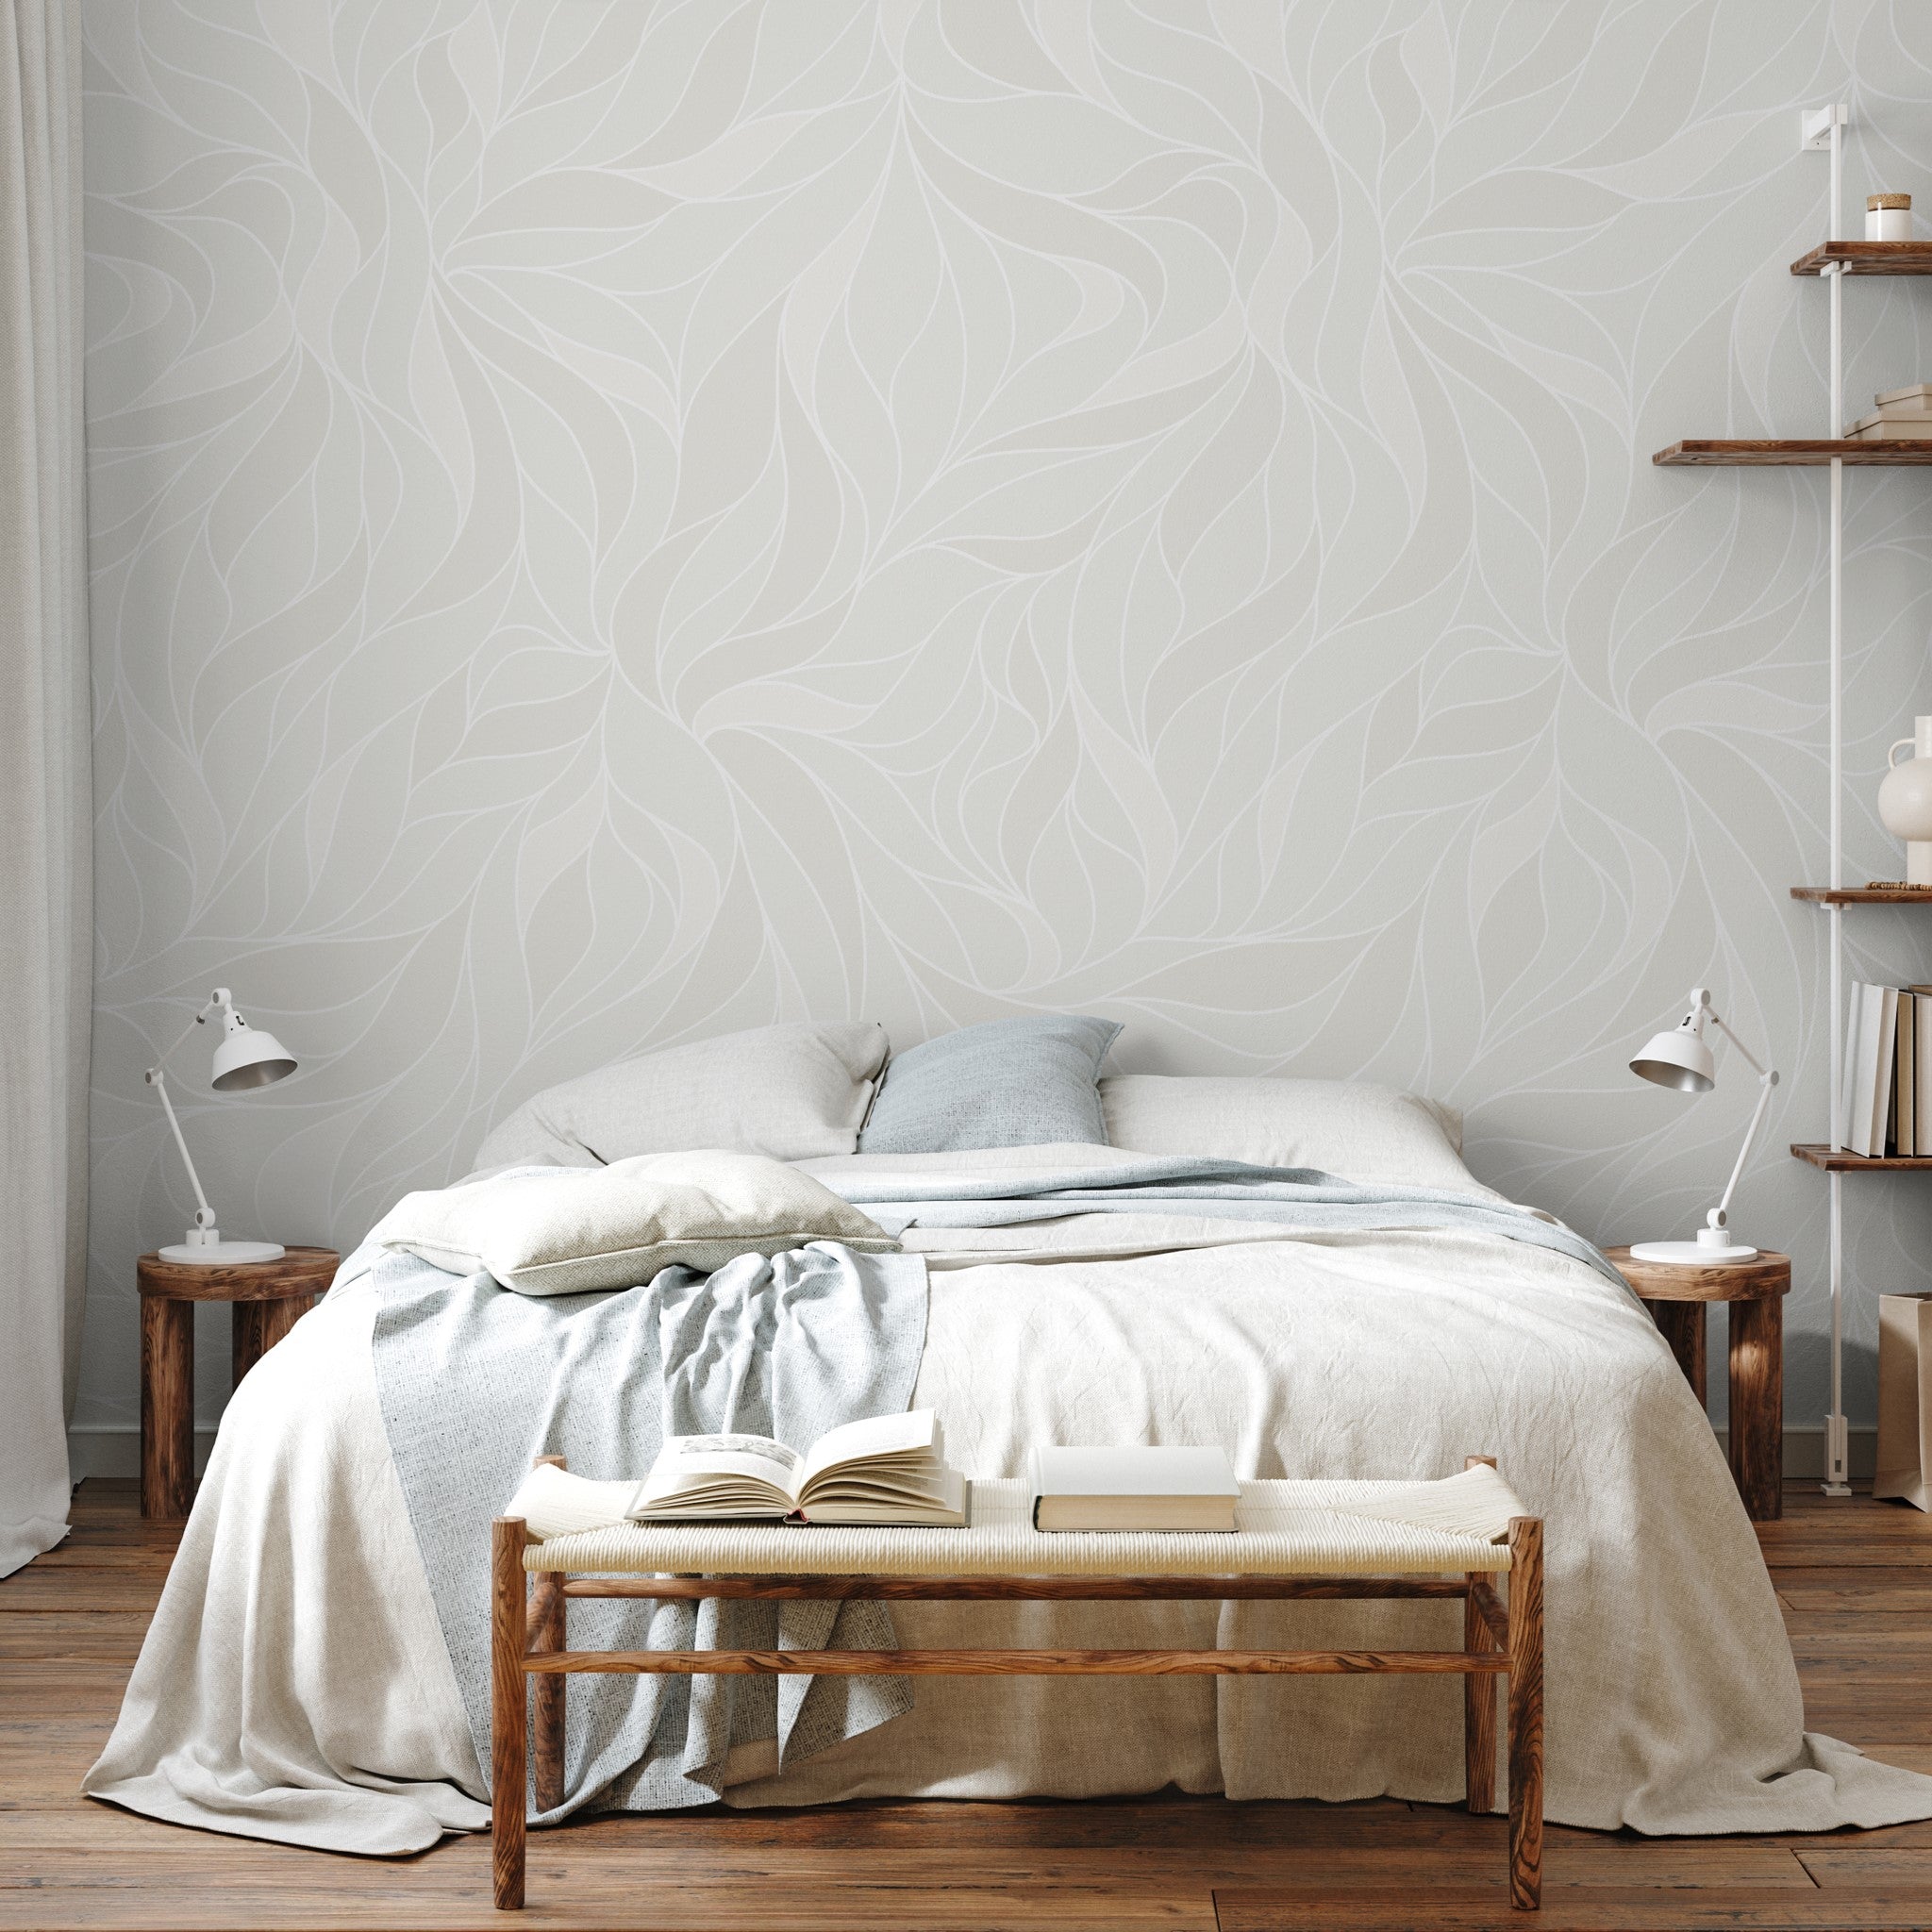 "Angel Wallpaper by Wall Blush in stylish bedroom with focus on the elegant wall design."